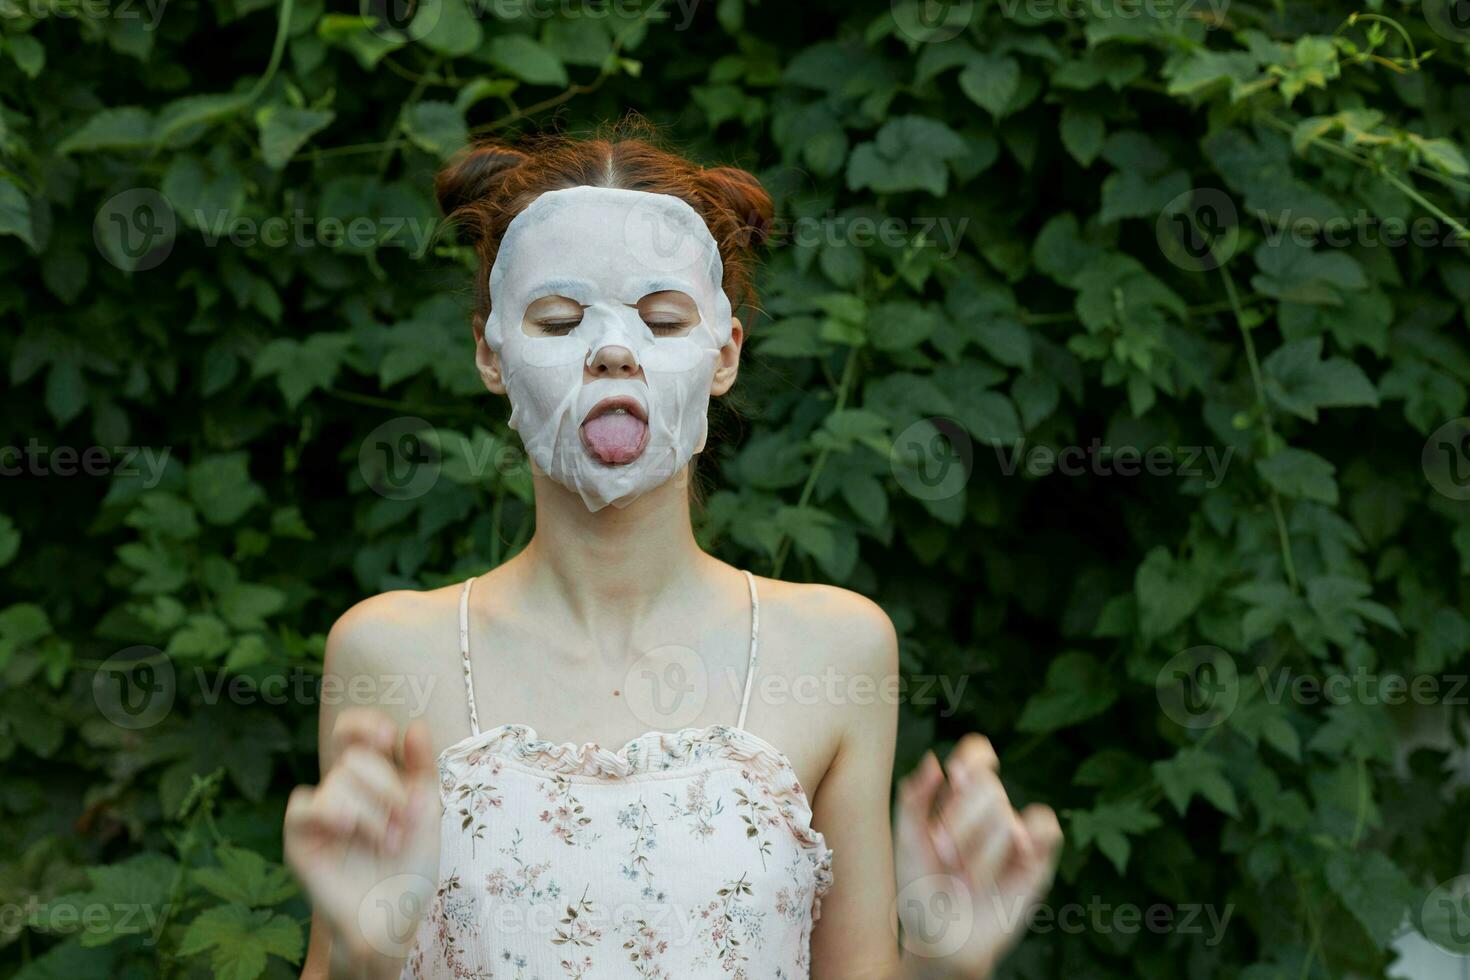 Portrait of a girl cosmetic maskc Shows his tongue and gestures with his hands osmetology bushes in the background photo